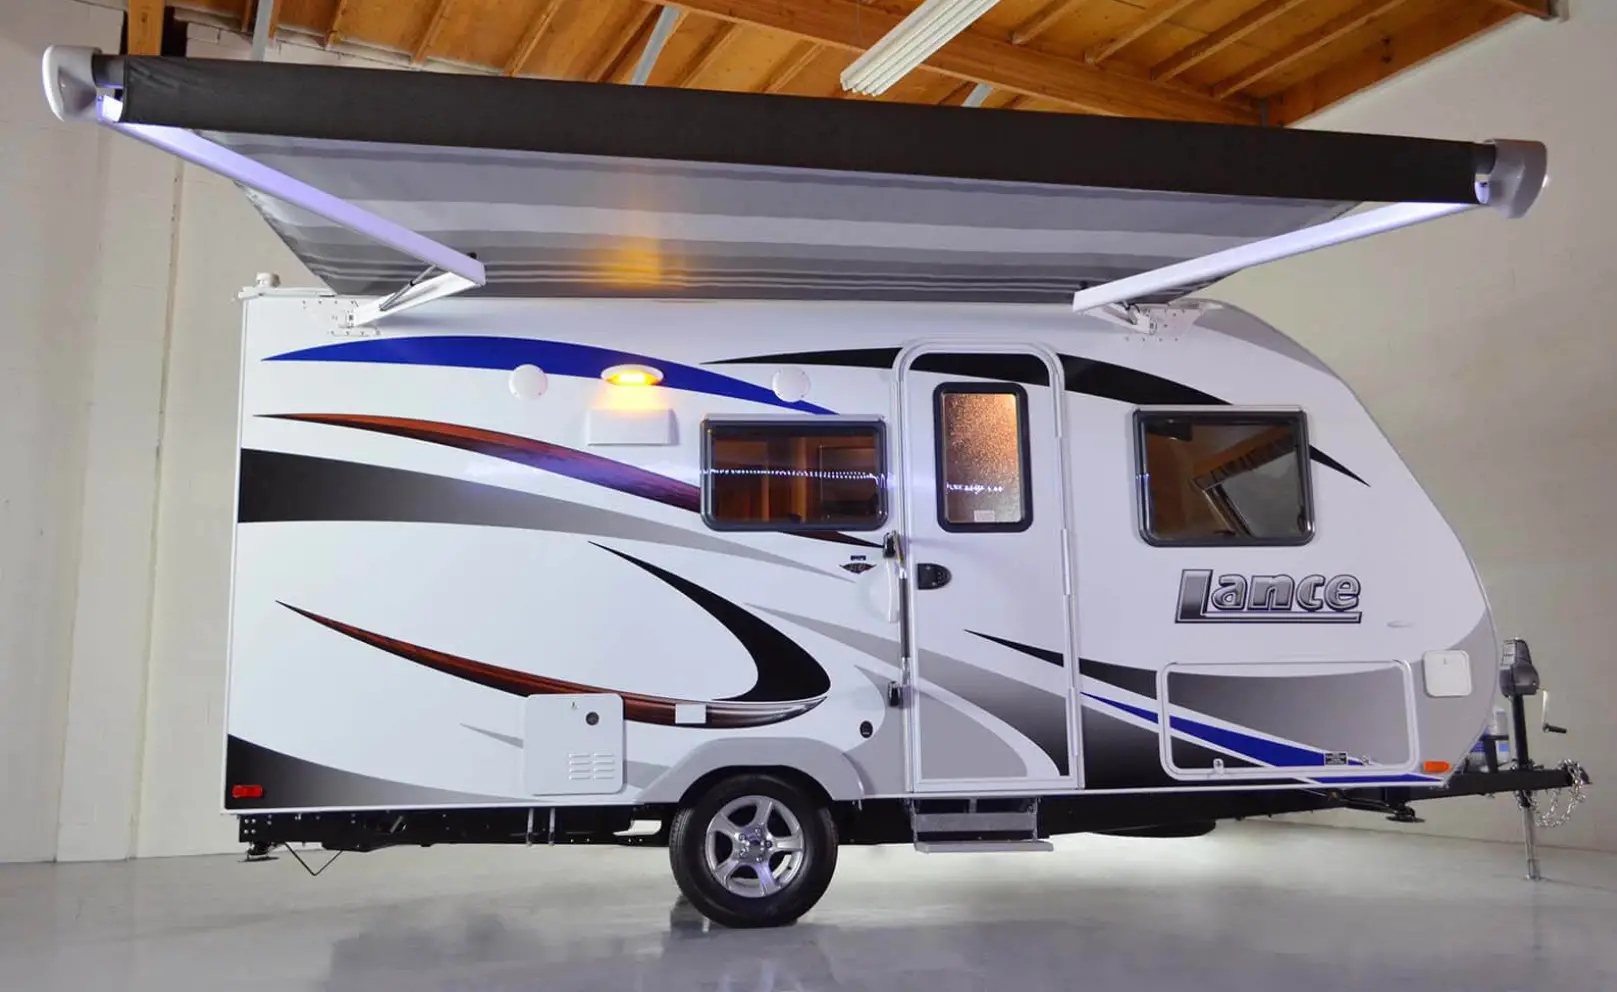 12 Best Travel Trailers Under 3000 Pounds | MR RV Travel Trailers Under 3000 Lbs Dry Weight